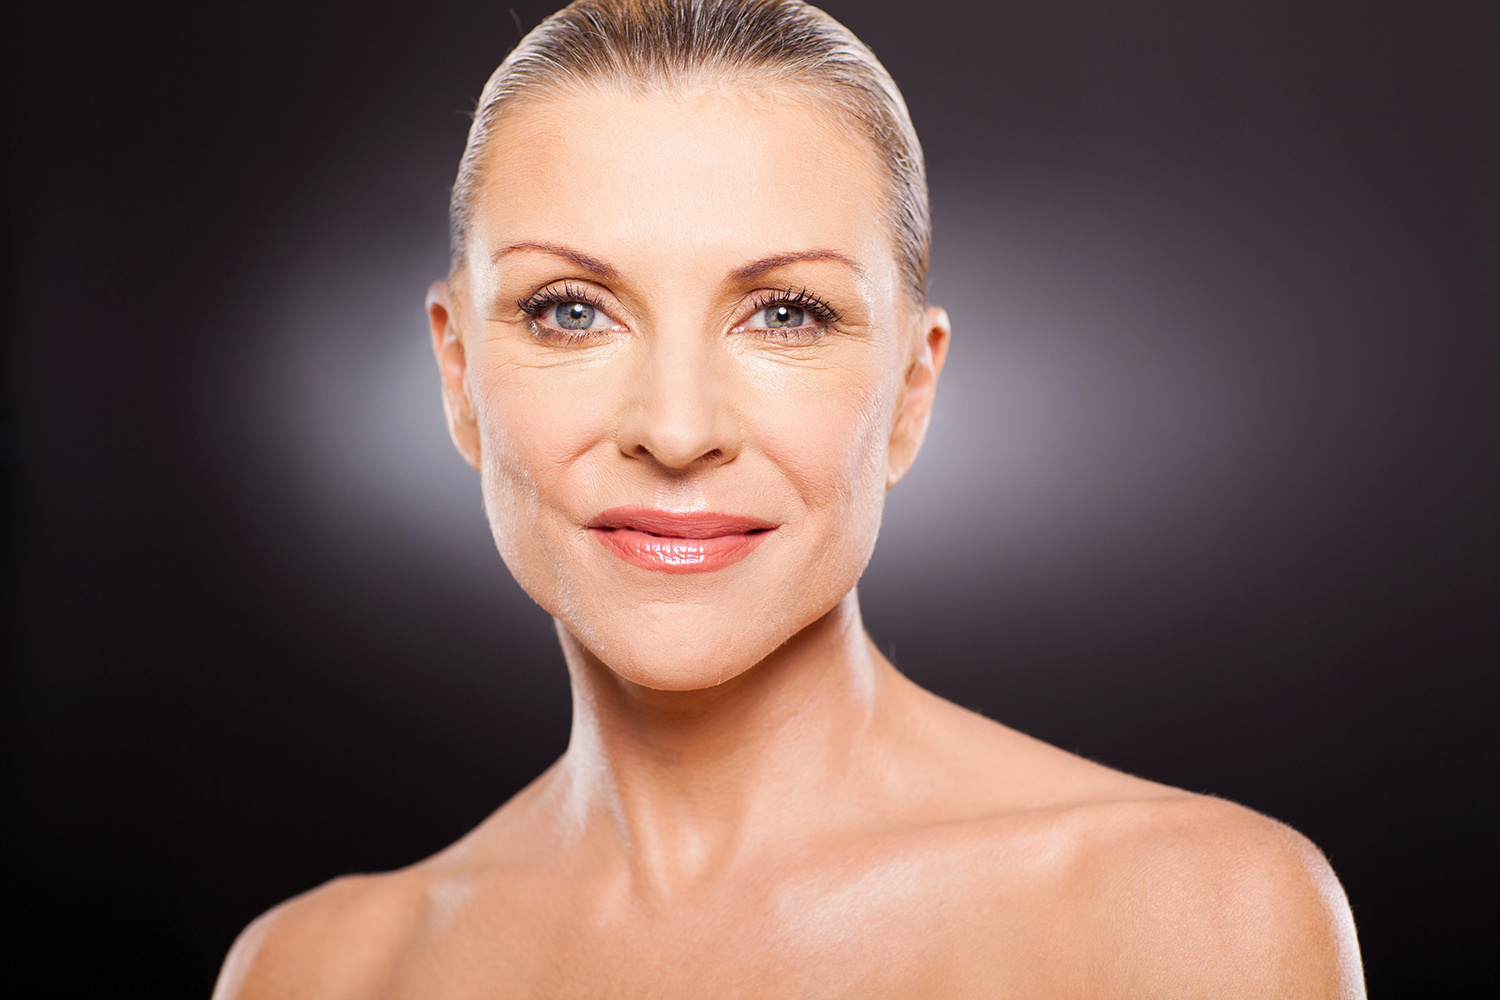 Anti-Aging Decollate Treatment